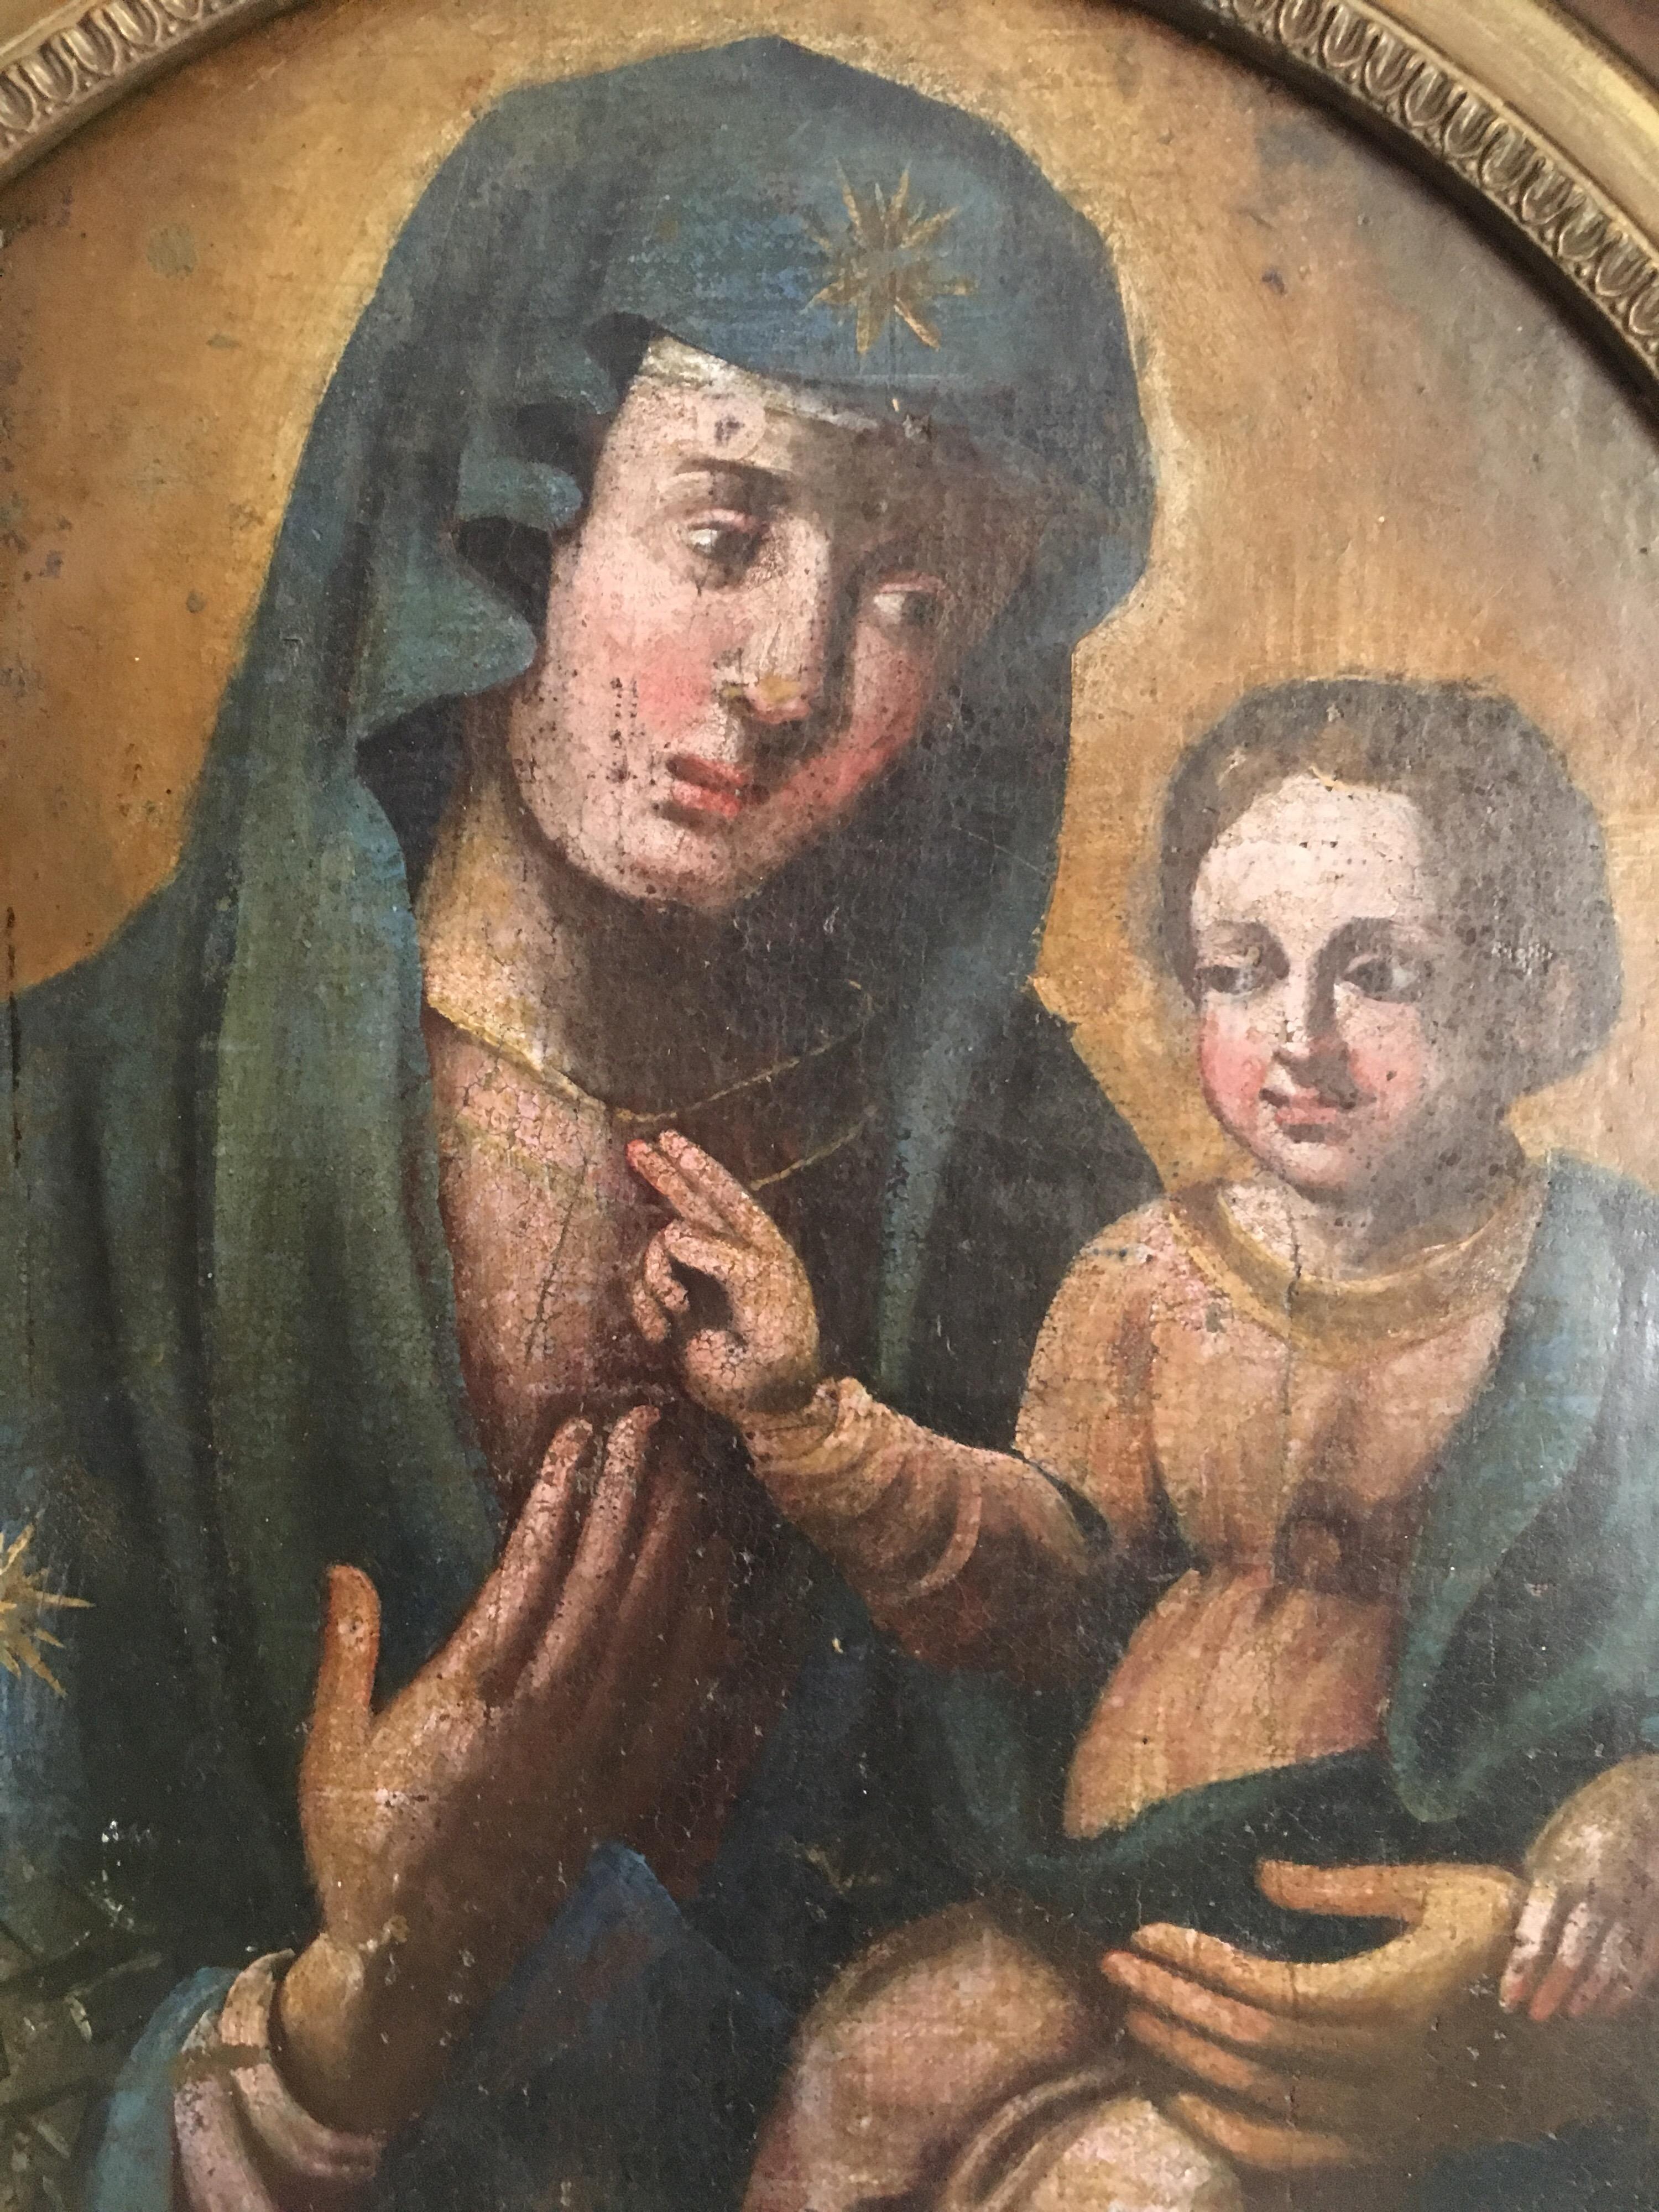 Virgin and Child
Italian School, circa 1730's
Oil painting on canvas laid on board, framed
Framed size: 29 x 25 inches

Madonna and child, the Virgin Mother and Jesus Christ as an infant. The most iconic mother and son portrait, set within an